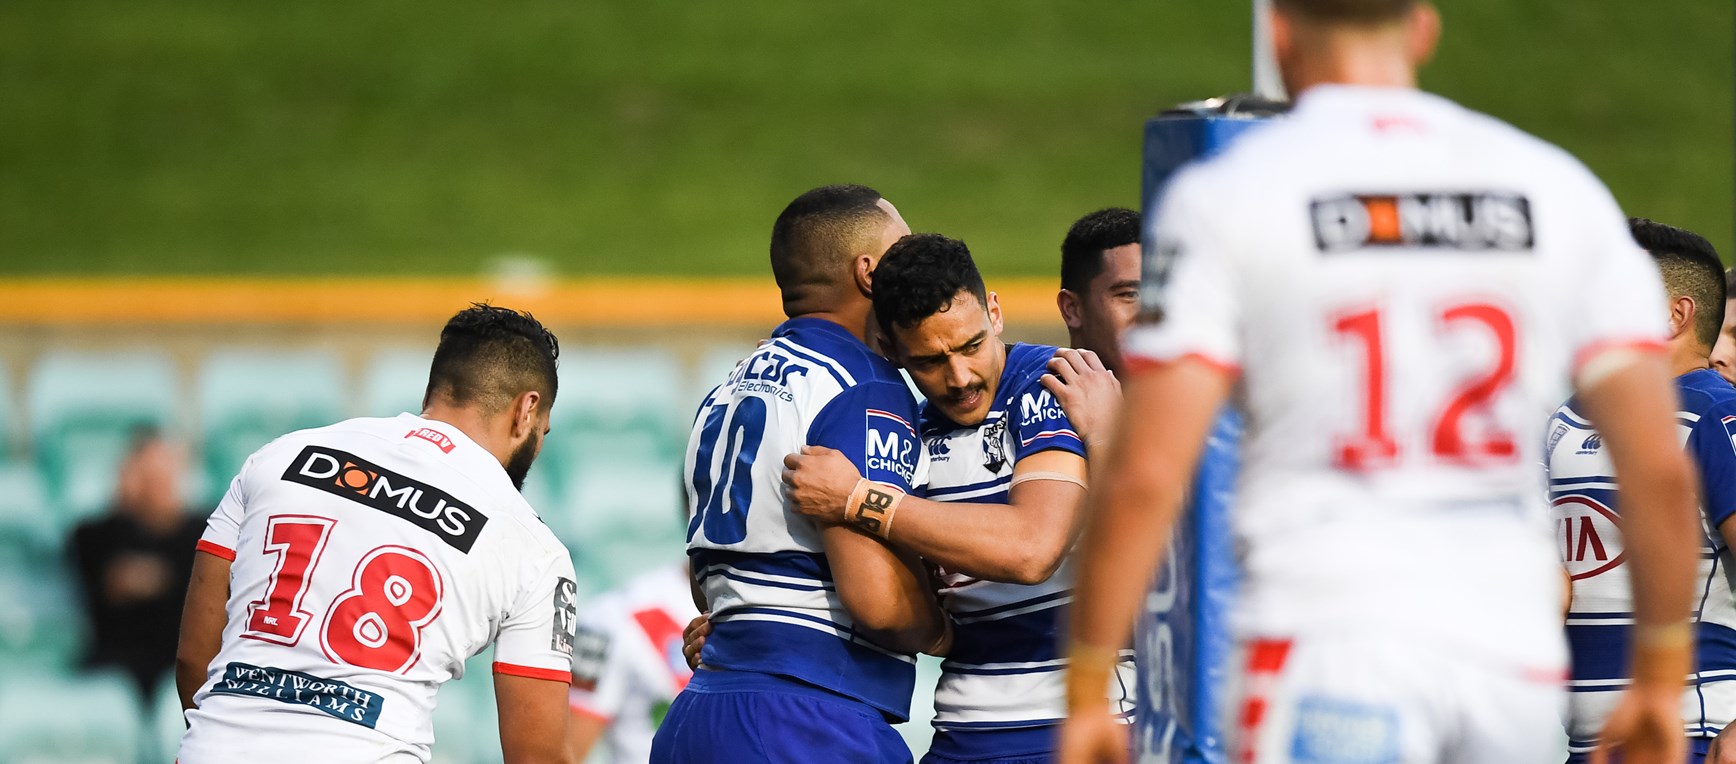 GALLERY | Bulldogs Setup Clash with the Jets